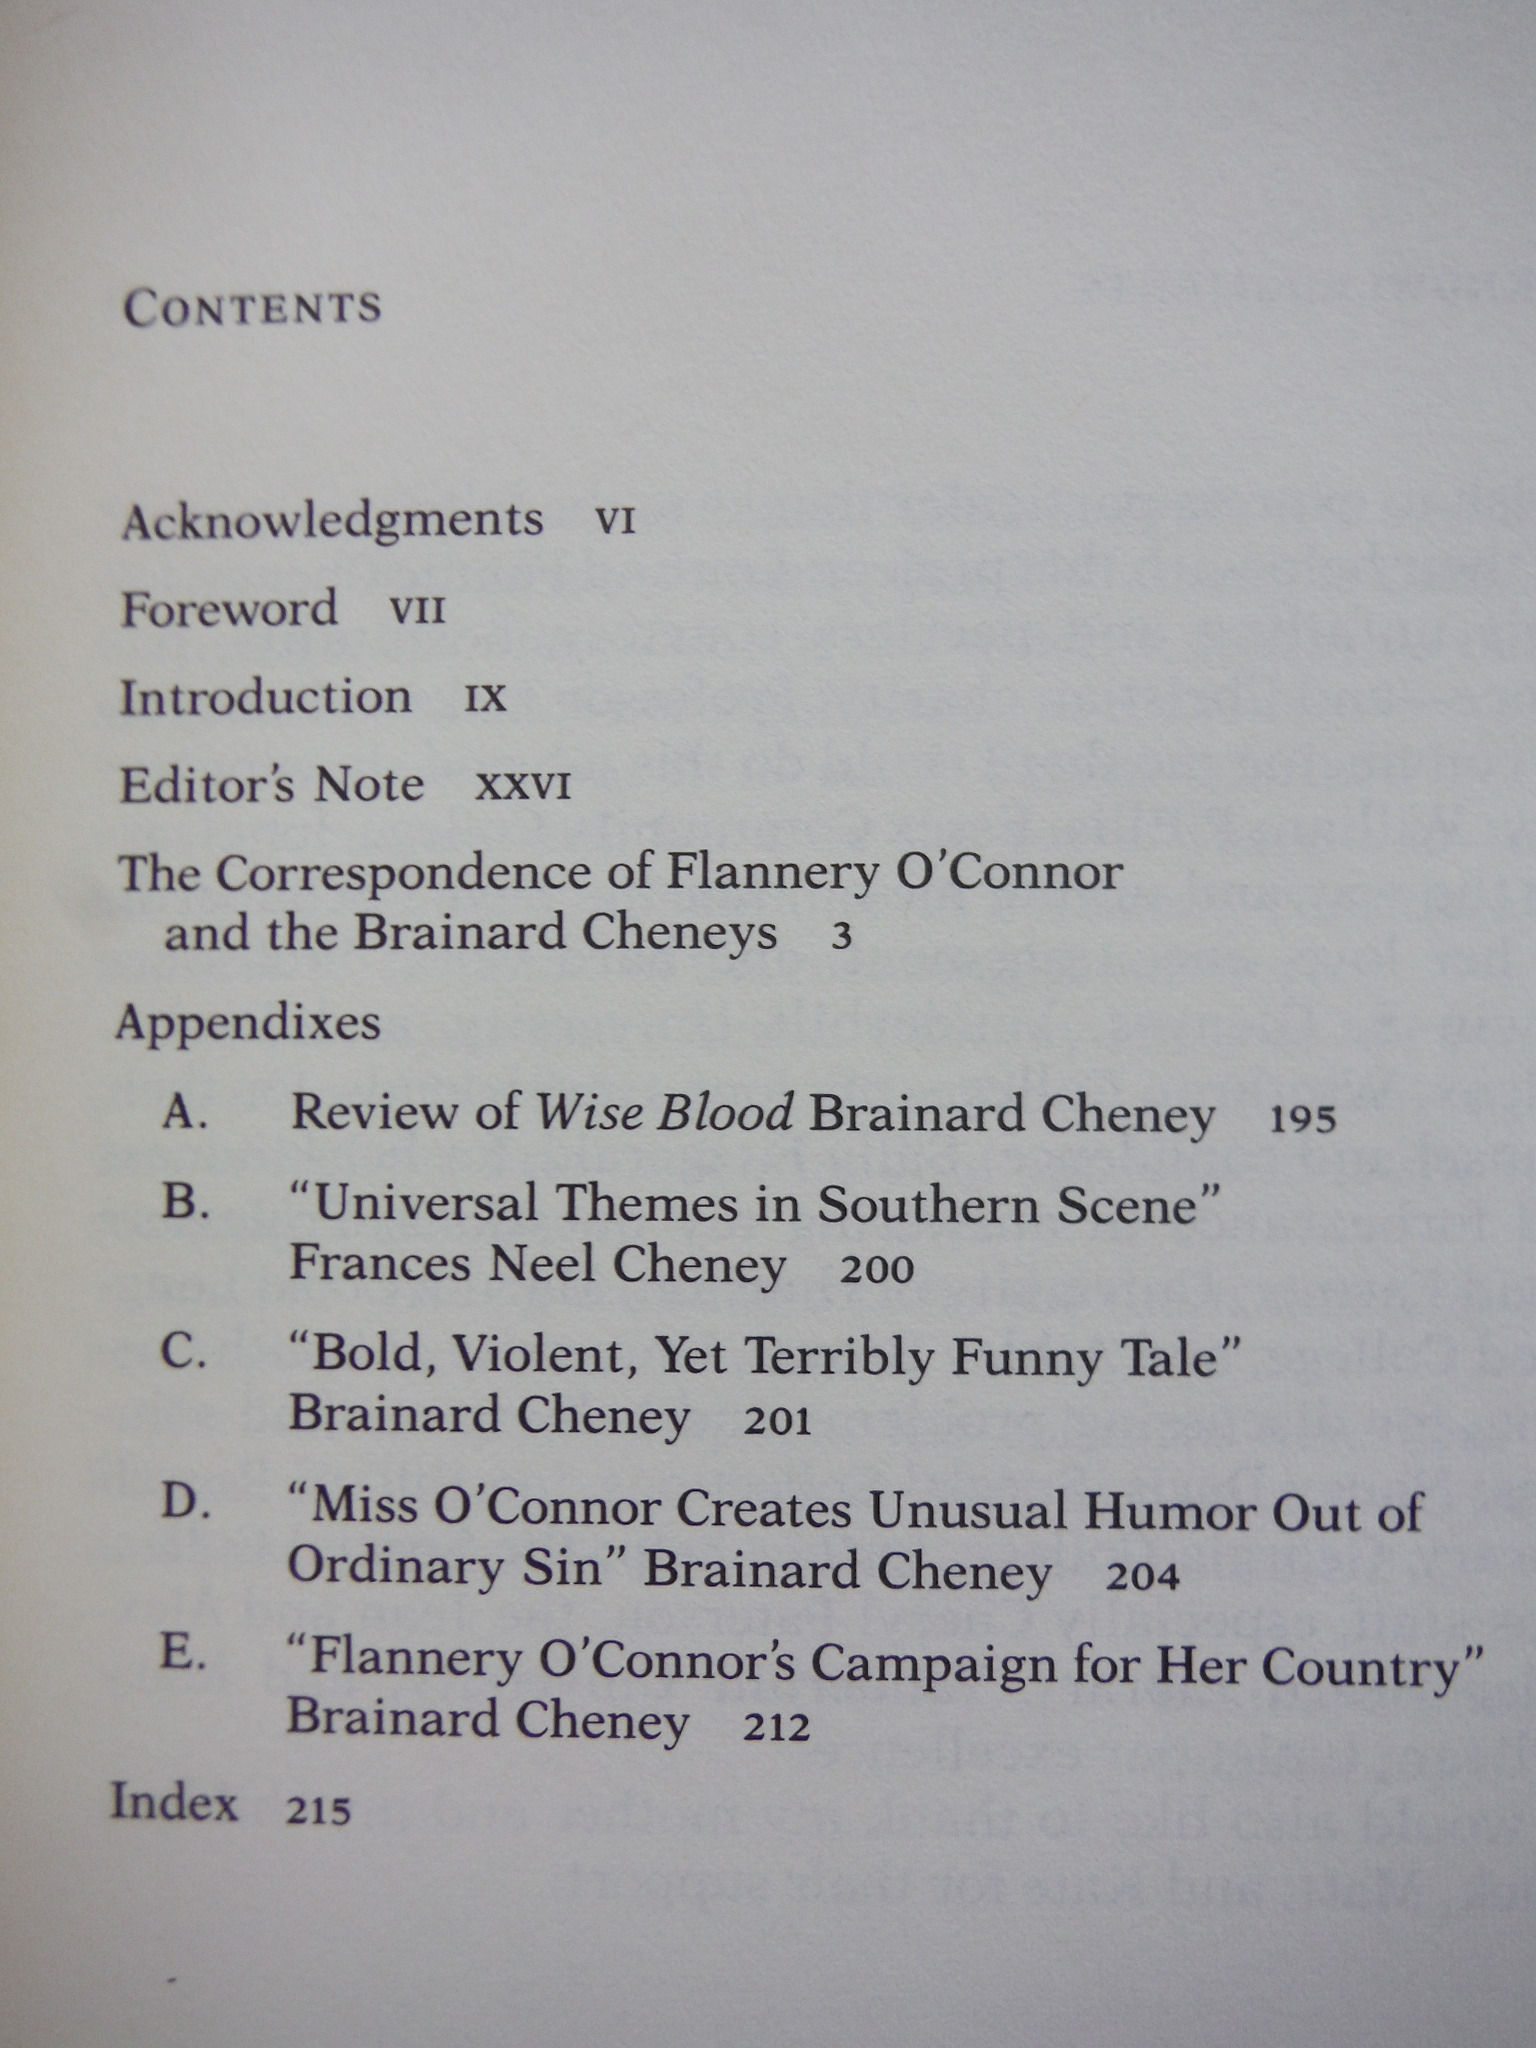 Image 1 of Correspondence of Flannery O'Connor and the Brainard Cheneys